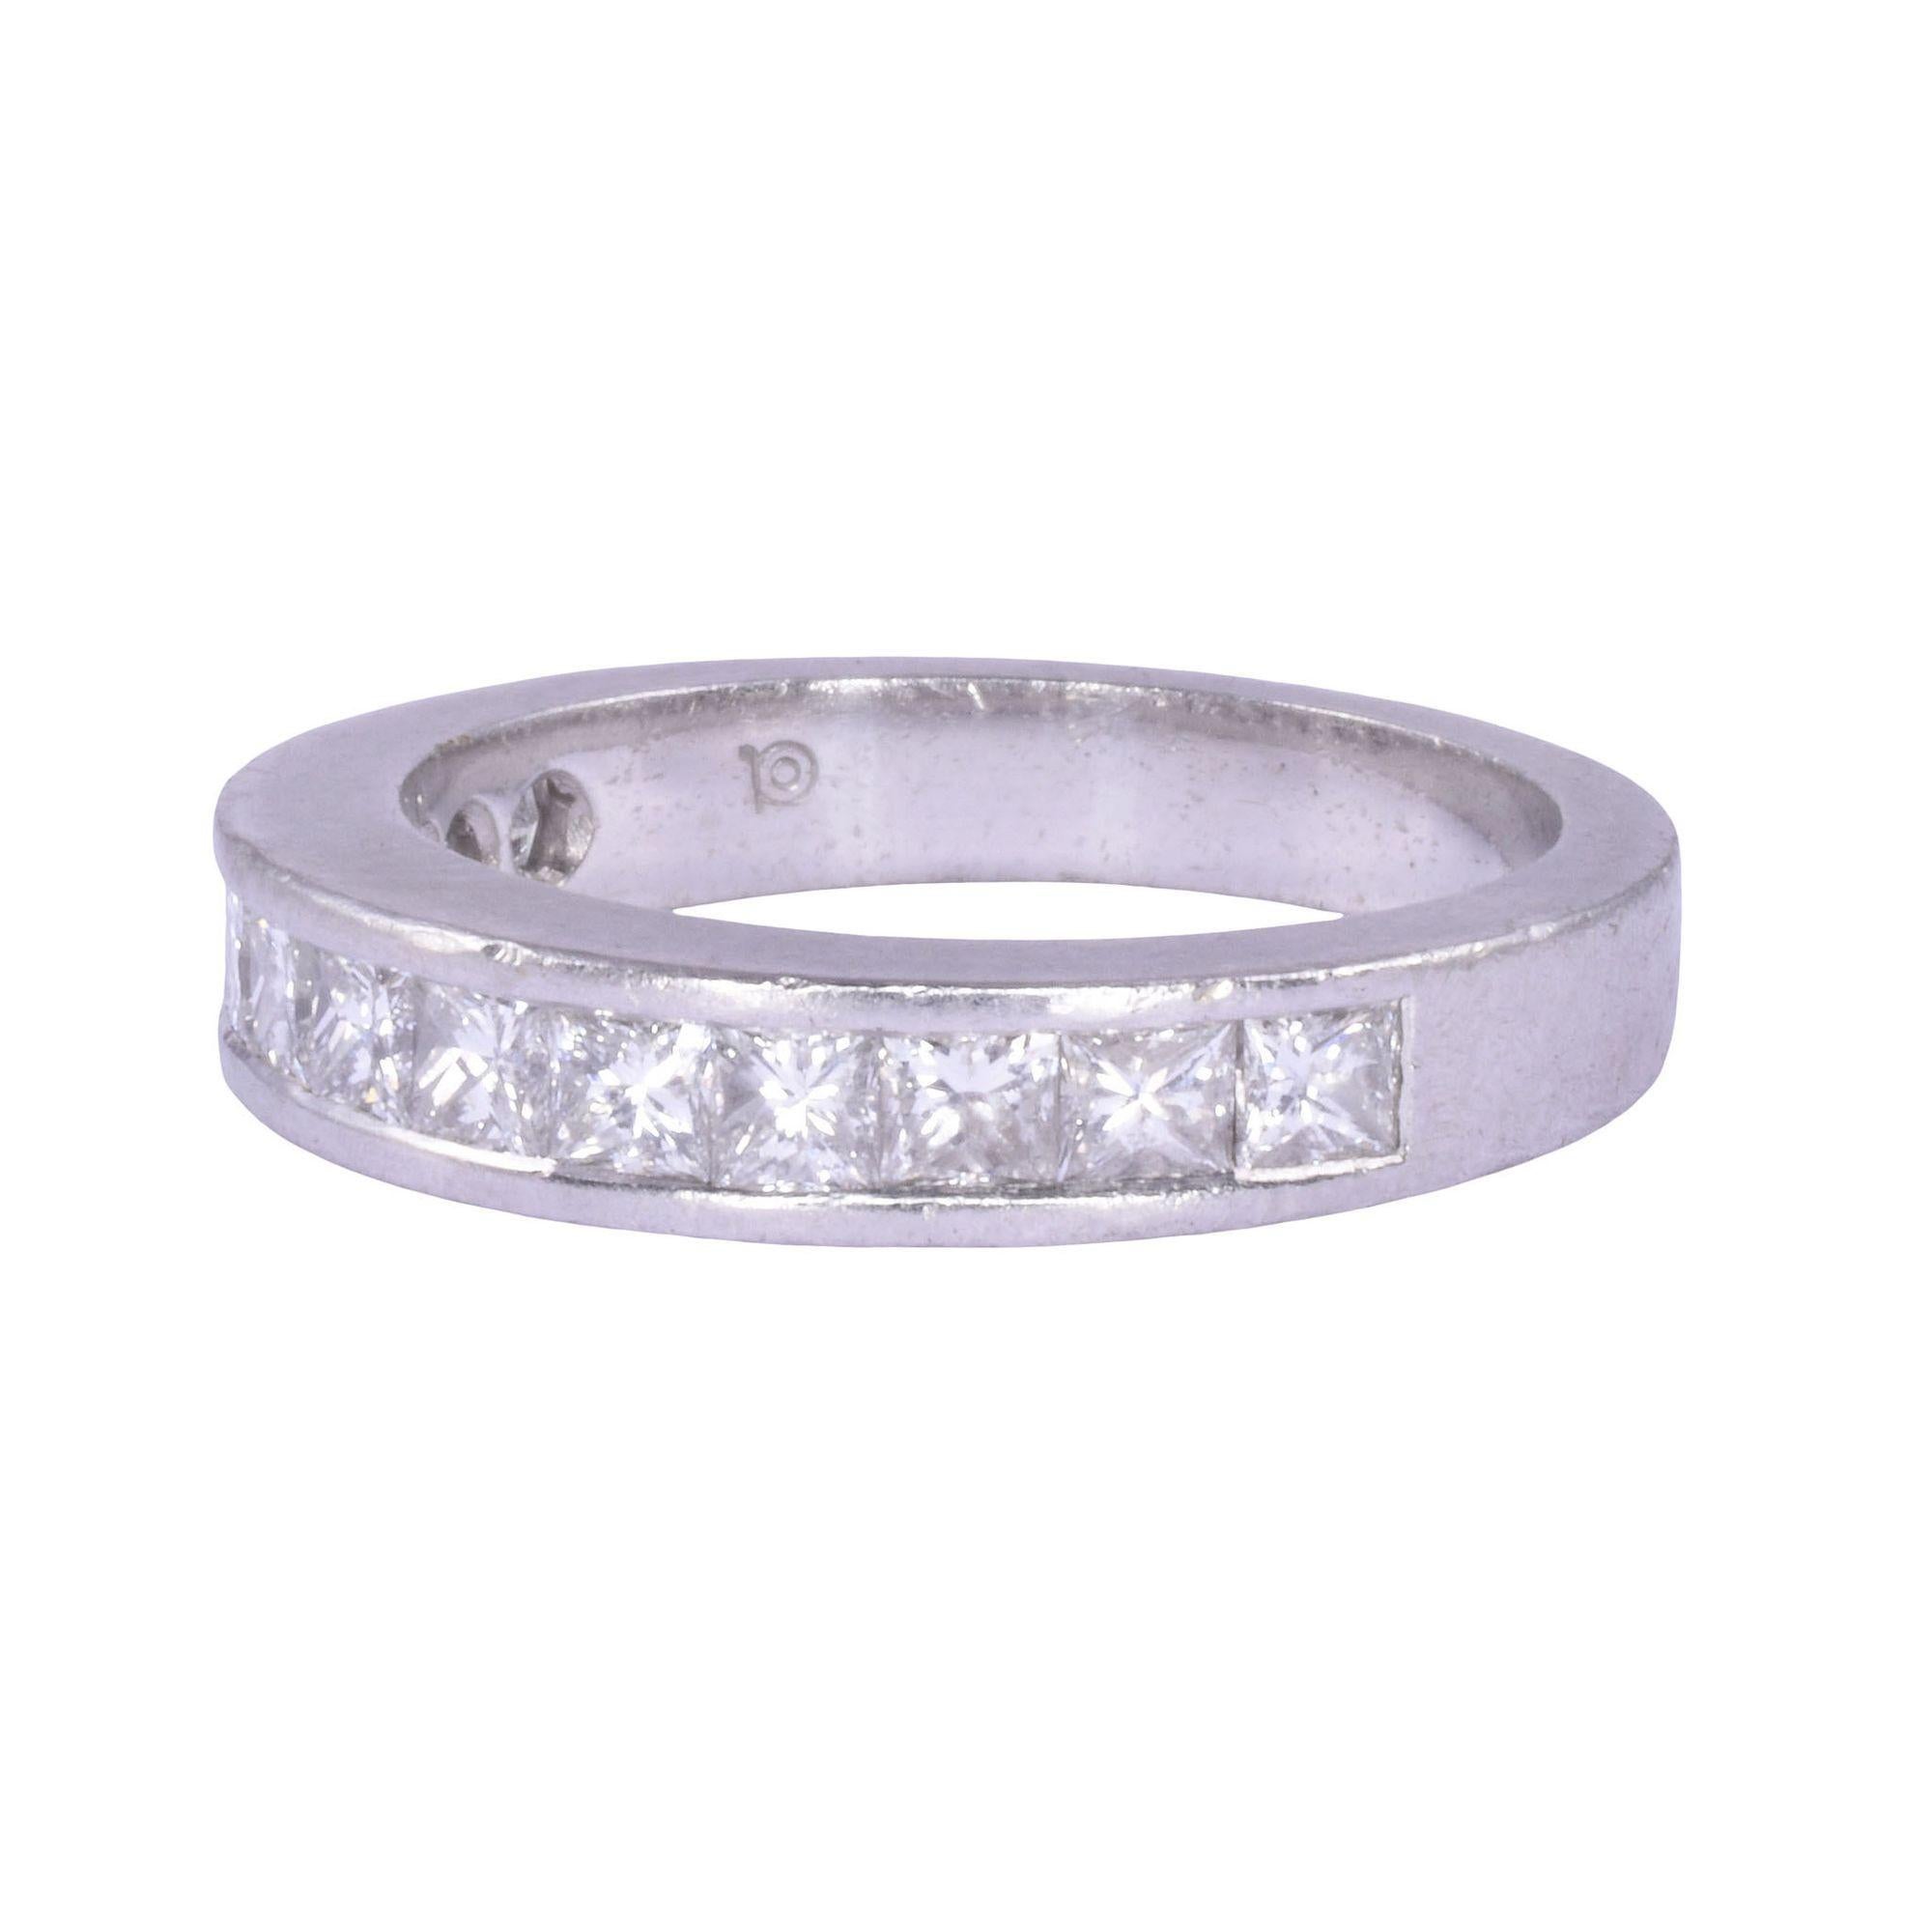 Estate princess cut diamond platinum band. This platinum band features 1.07 carat total weight of princess cut diamonds with VS1-2 clarity and H-I color. This platinum diamond band weighs 6.56 grams, is a size 5.25, and is appraised at $4,000. [KIMH